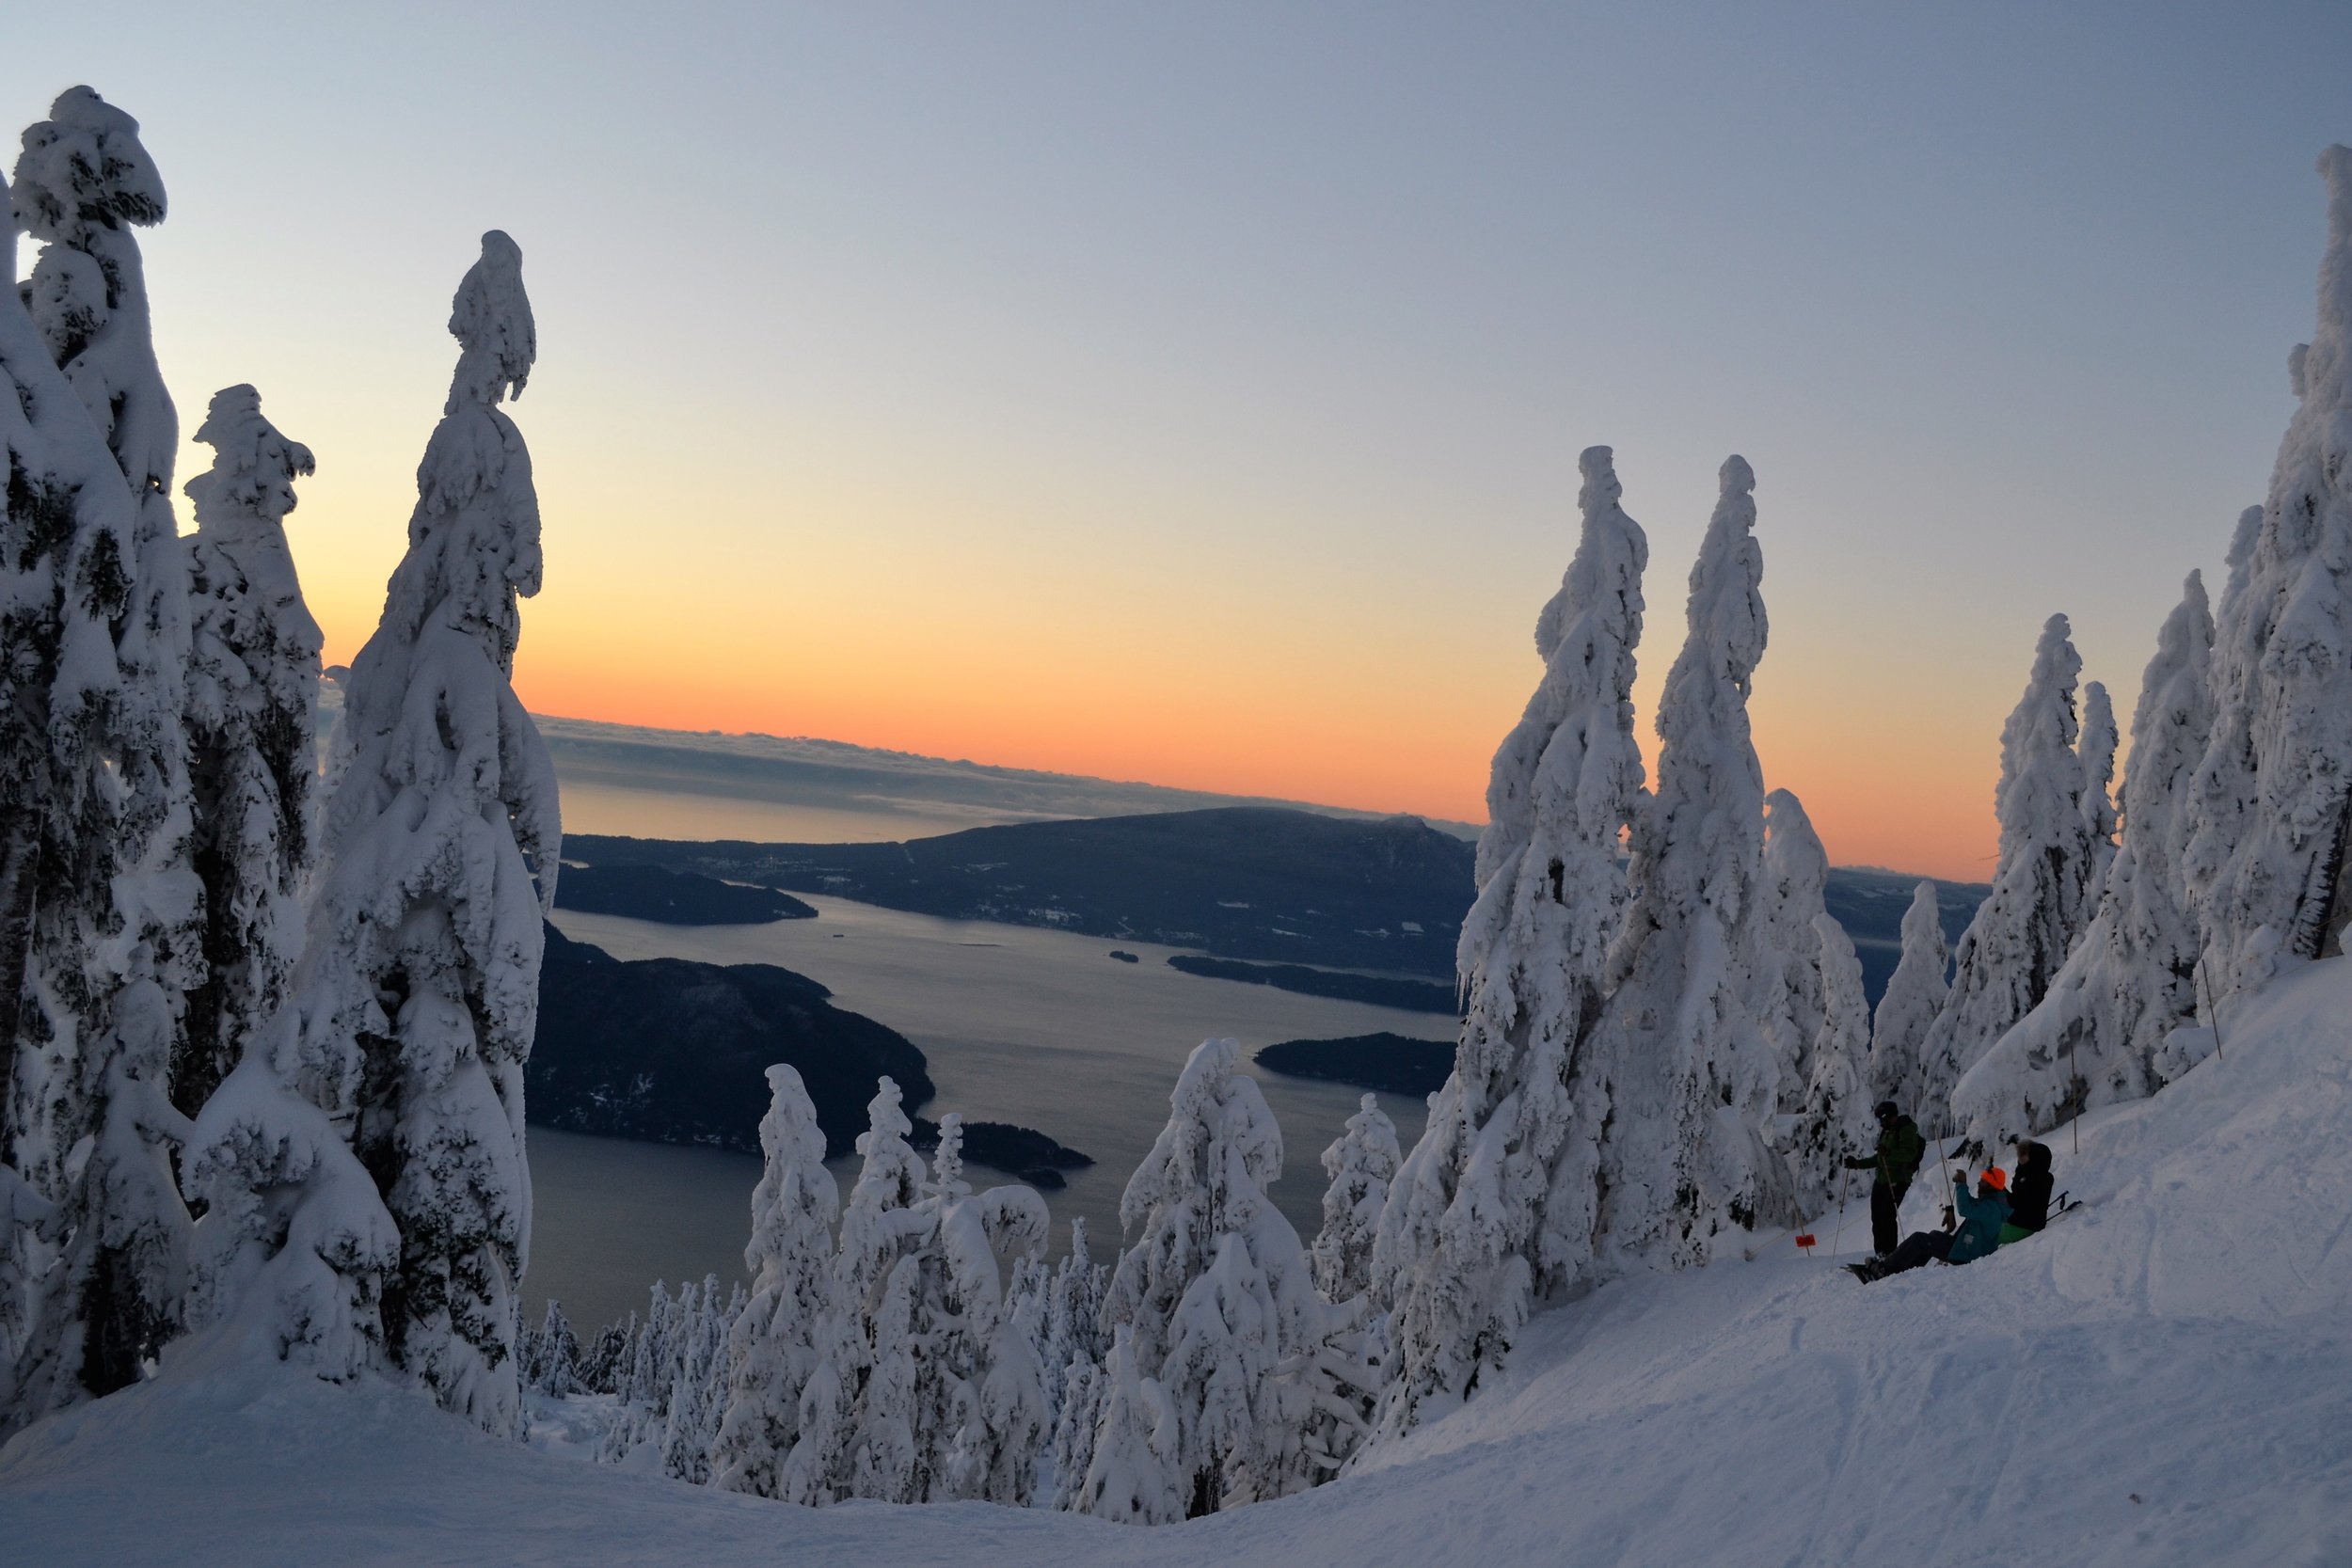 Snowboarders relaxing during sunset in Vancouver